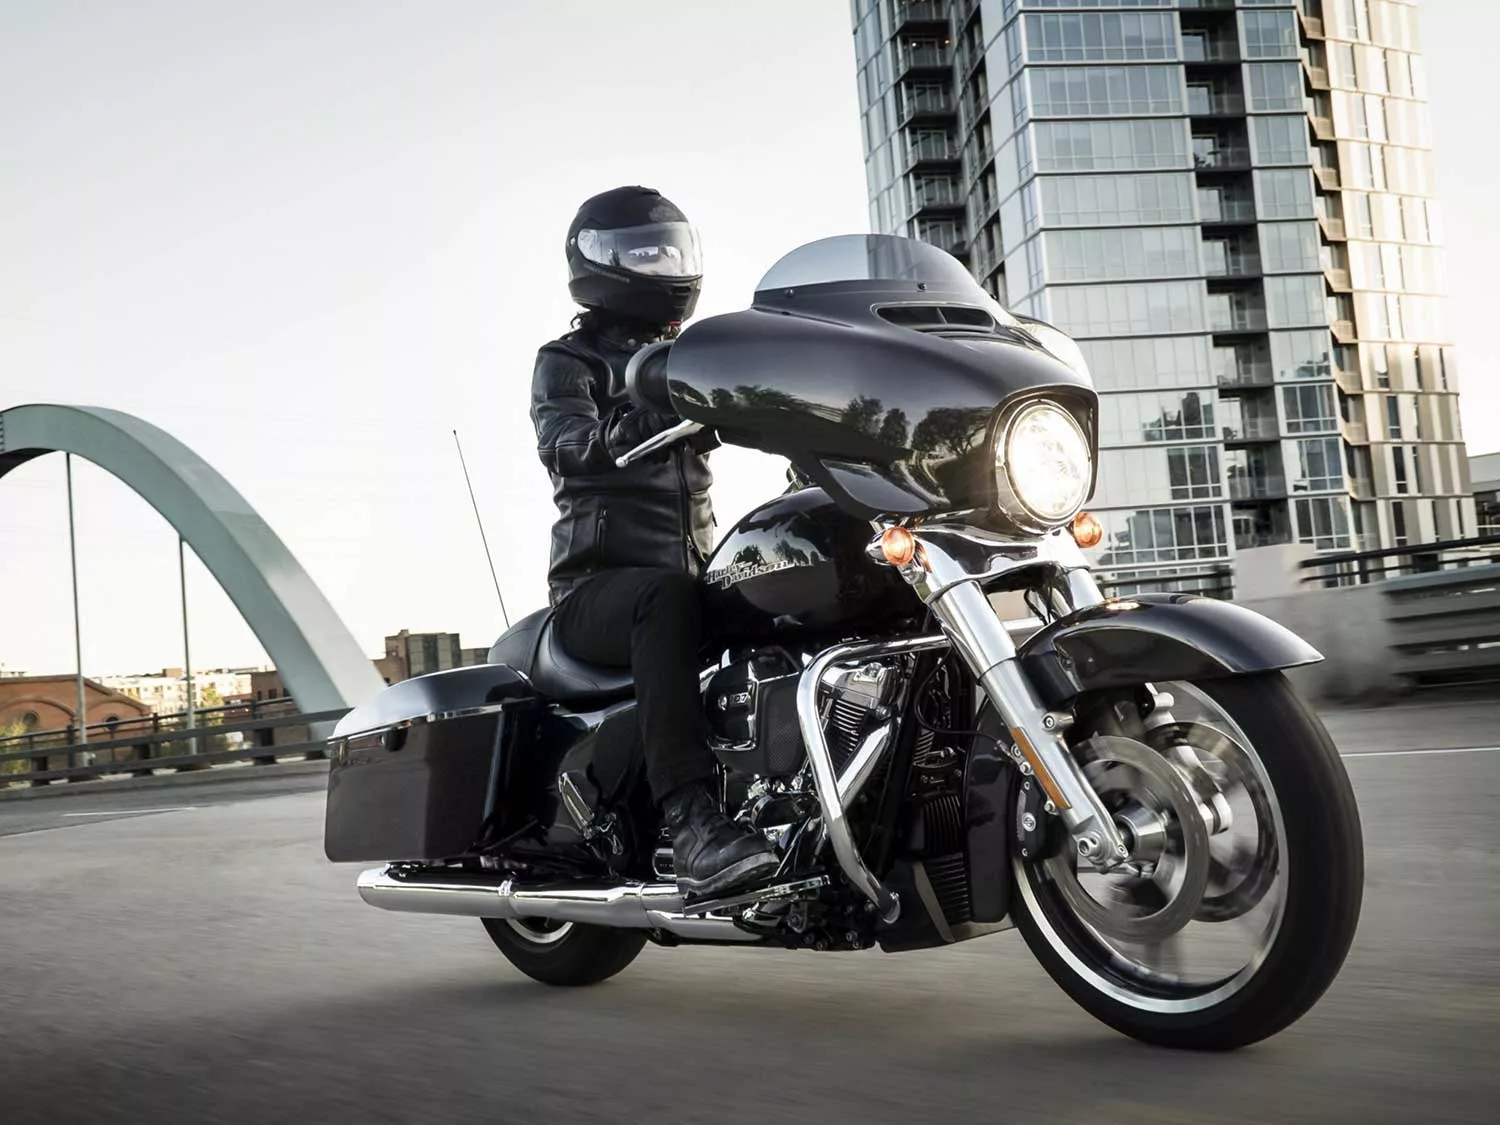 The Street Glide has been a chart-topper for years, but challengers to its throne are starting to stack up. Take a look at some other bagger options below.